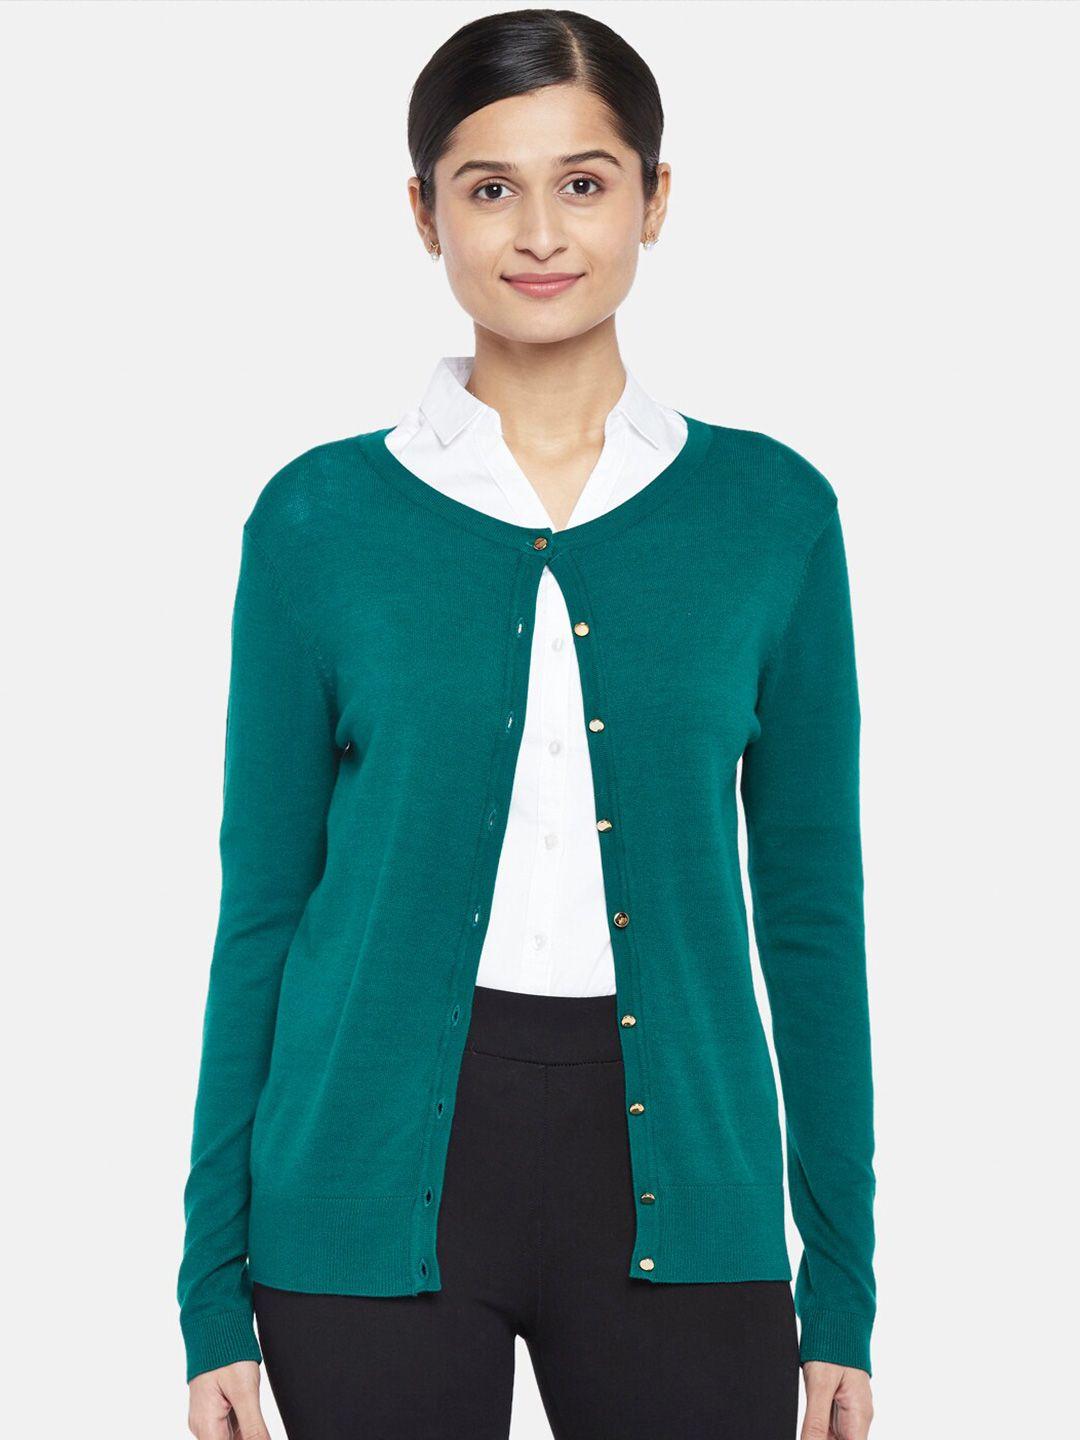 annabelle by pantaloons women teal cardigan